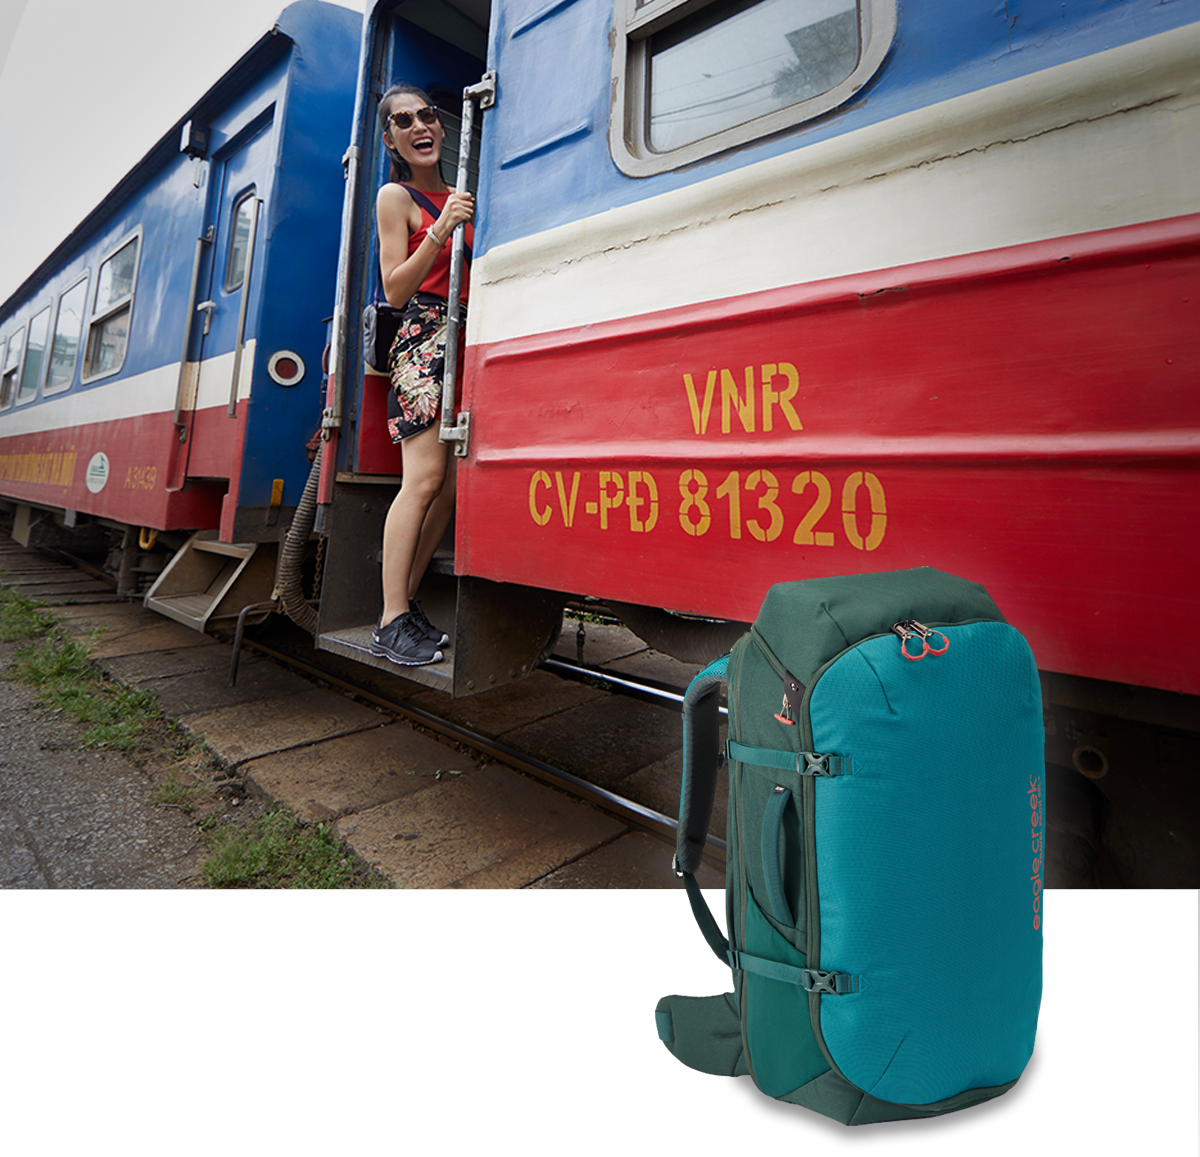 Lifestyle image of a woman peeking outside the door of train. Teal Duffel bag product image placed on top of the lifestyle image.